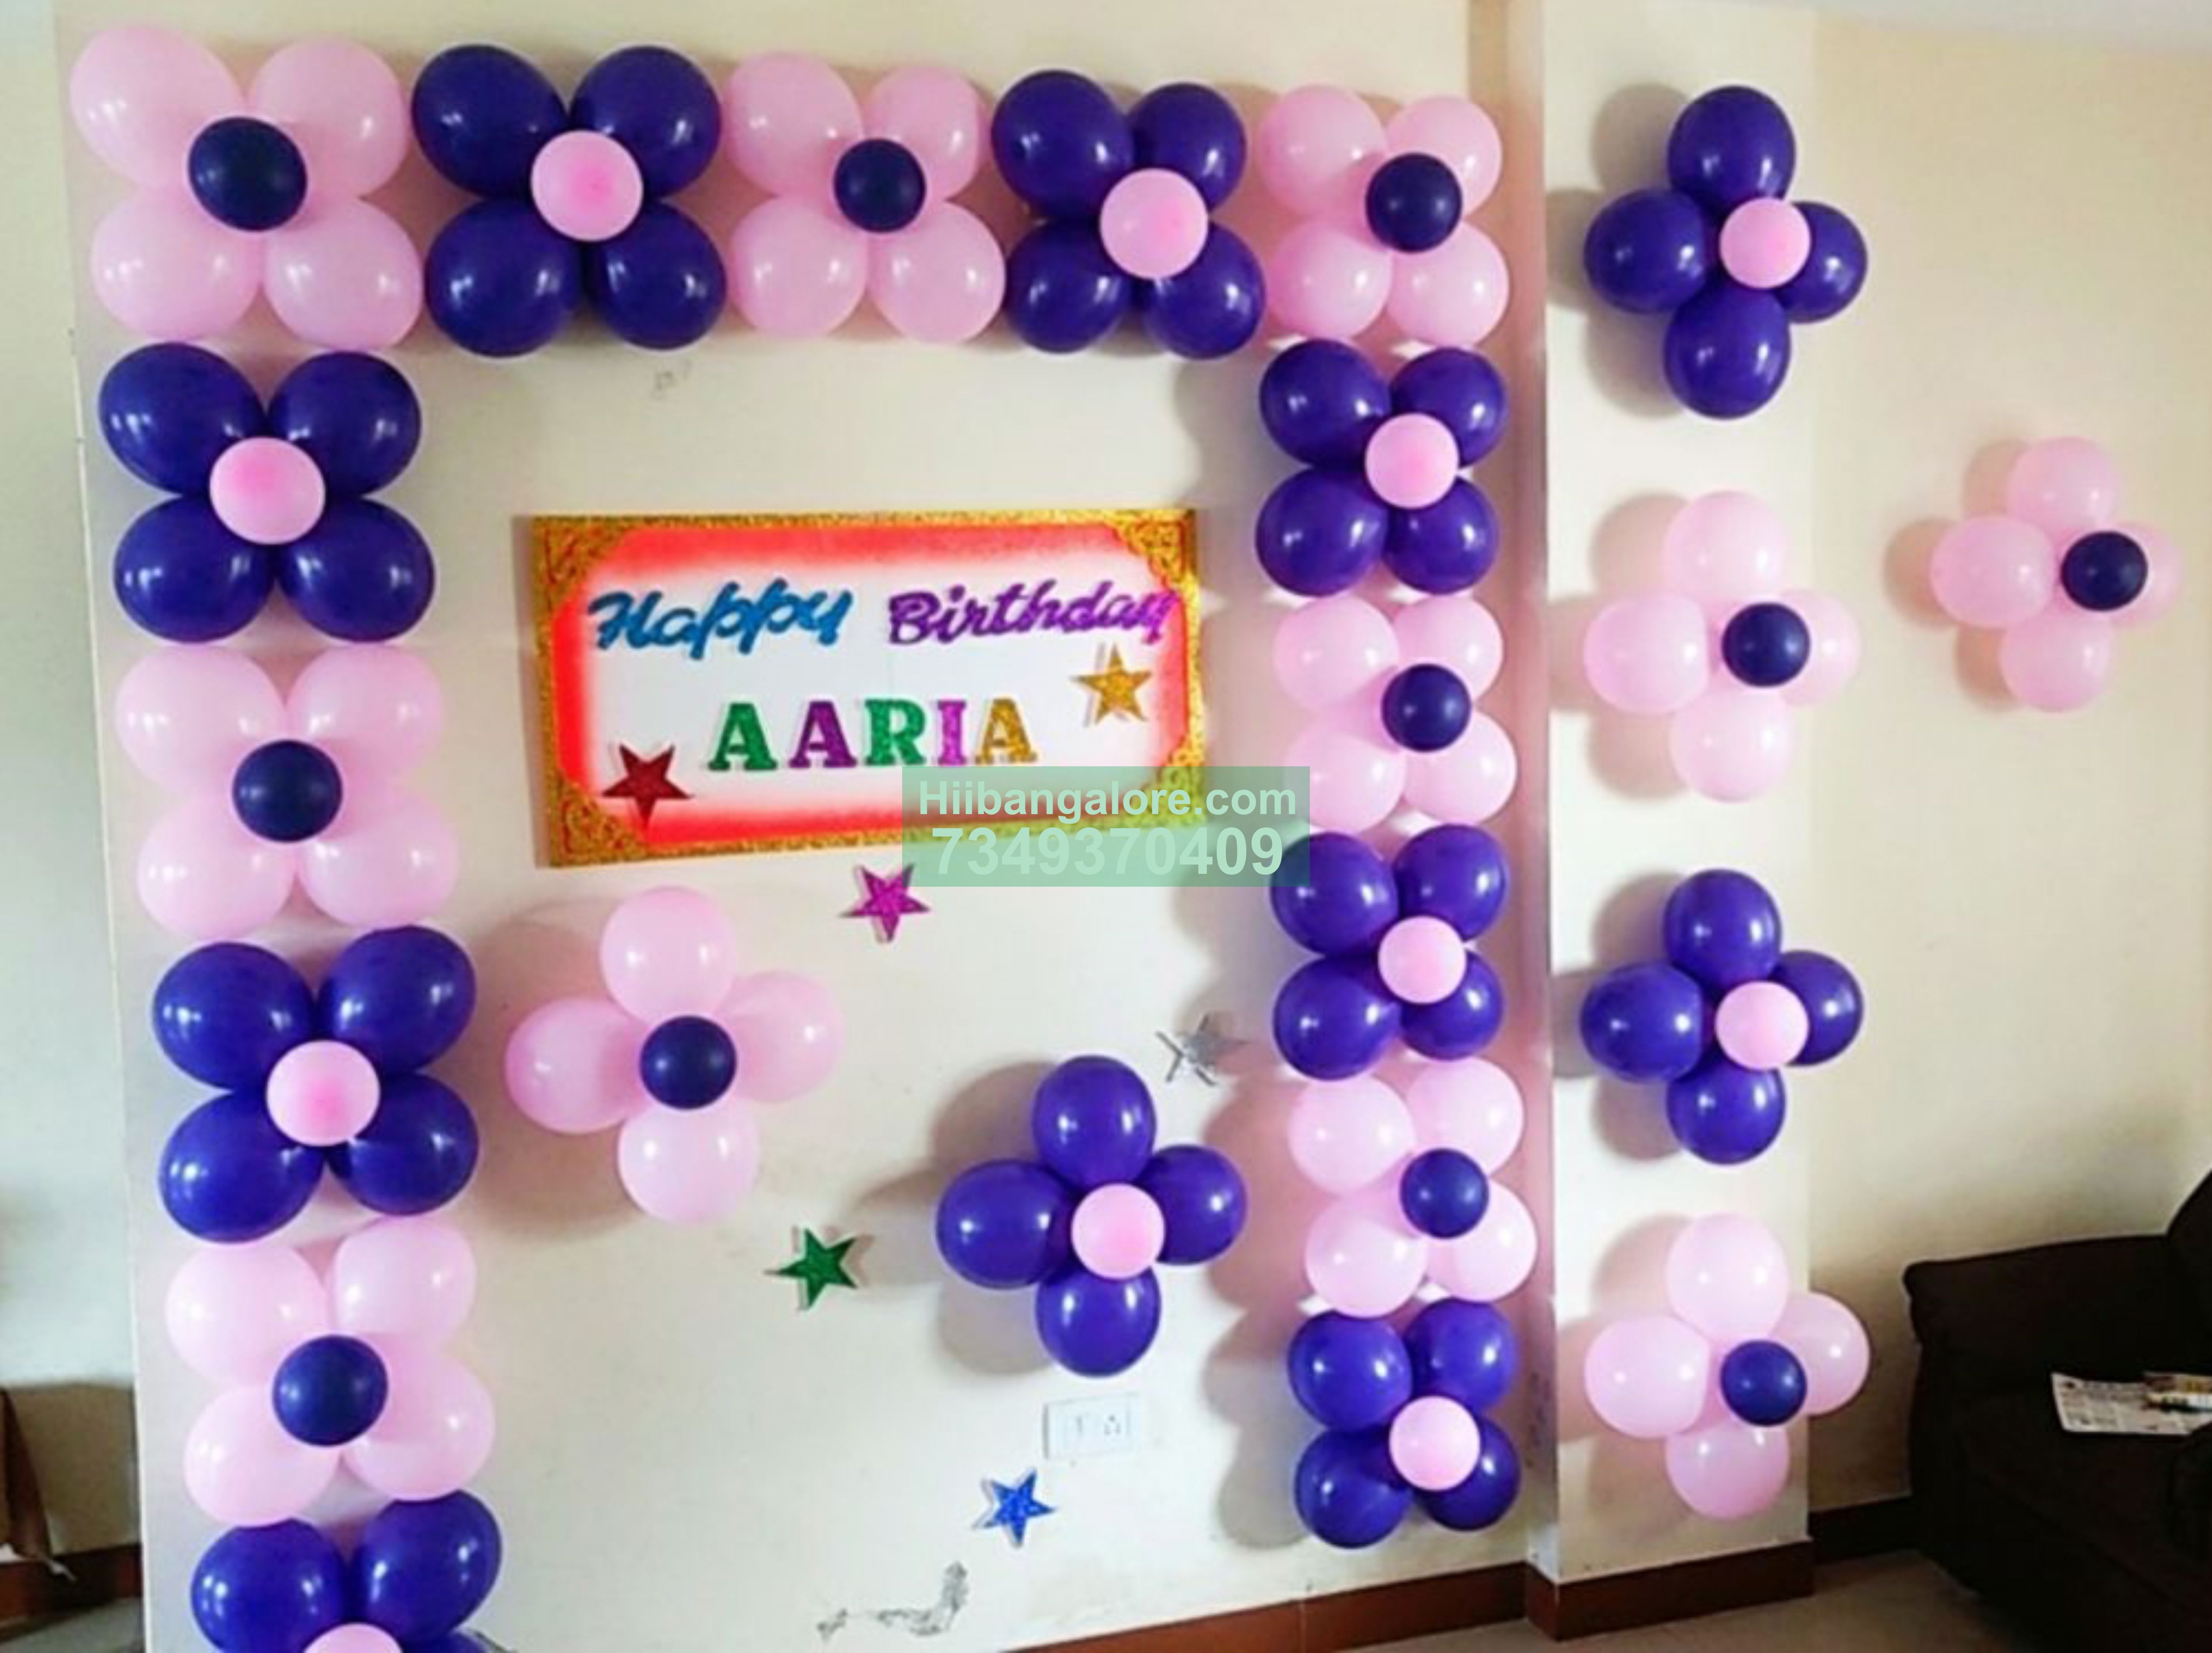 Simple Purple Pink Birthday Decoration At Home Best Party Anisers Balloon Decorators Caterers In Bangalore - How To Decorate Balloons In Birthday Party At Home